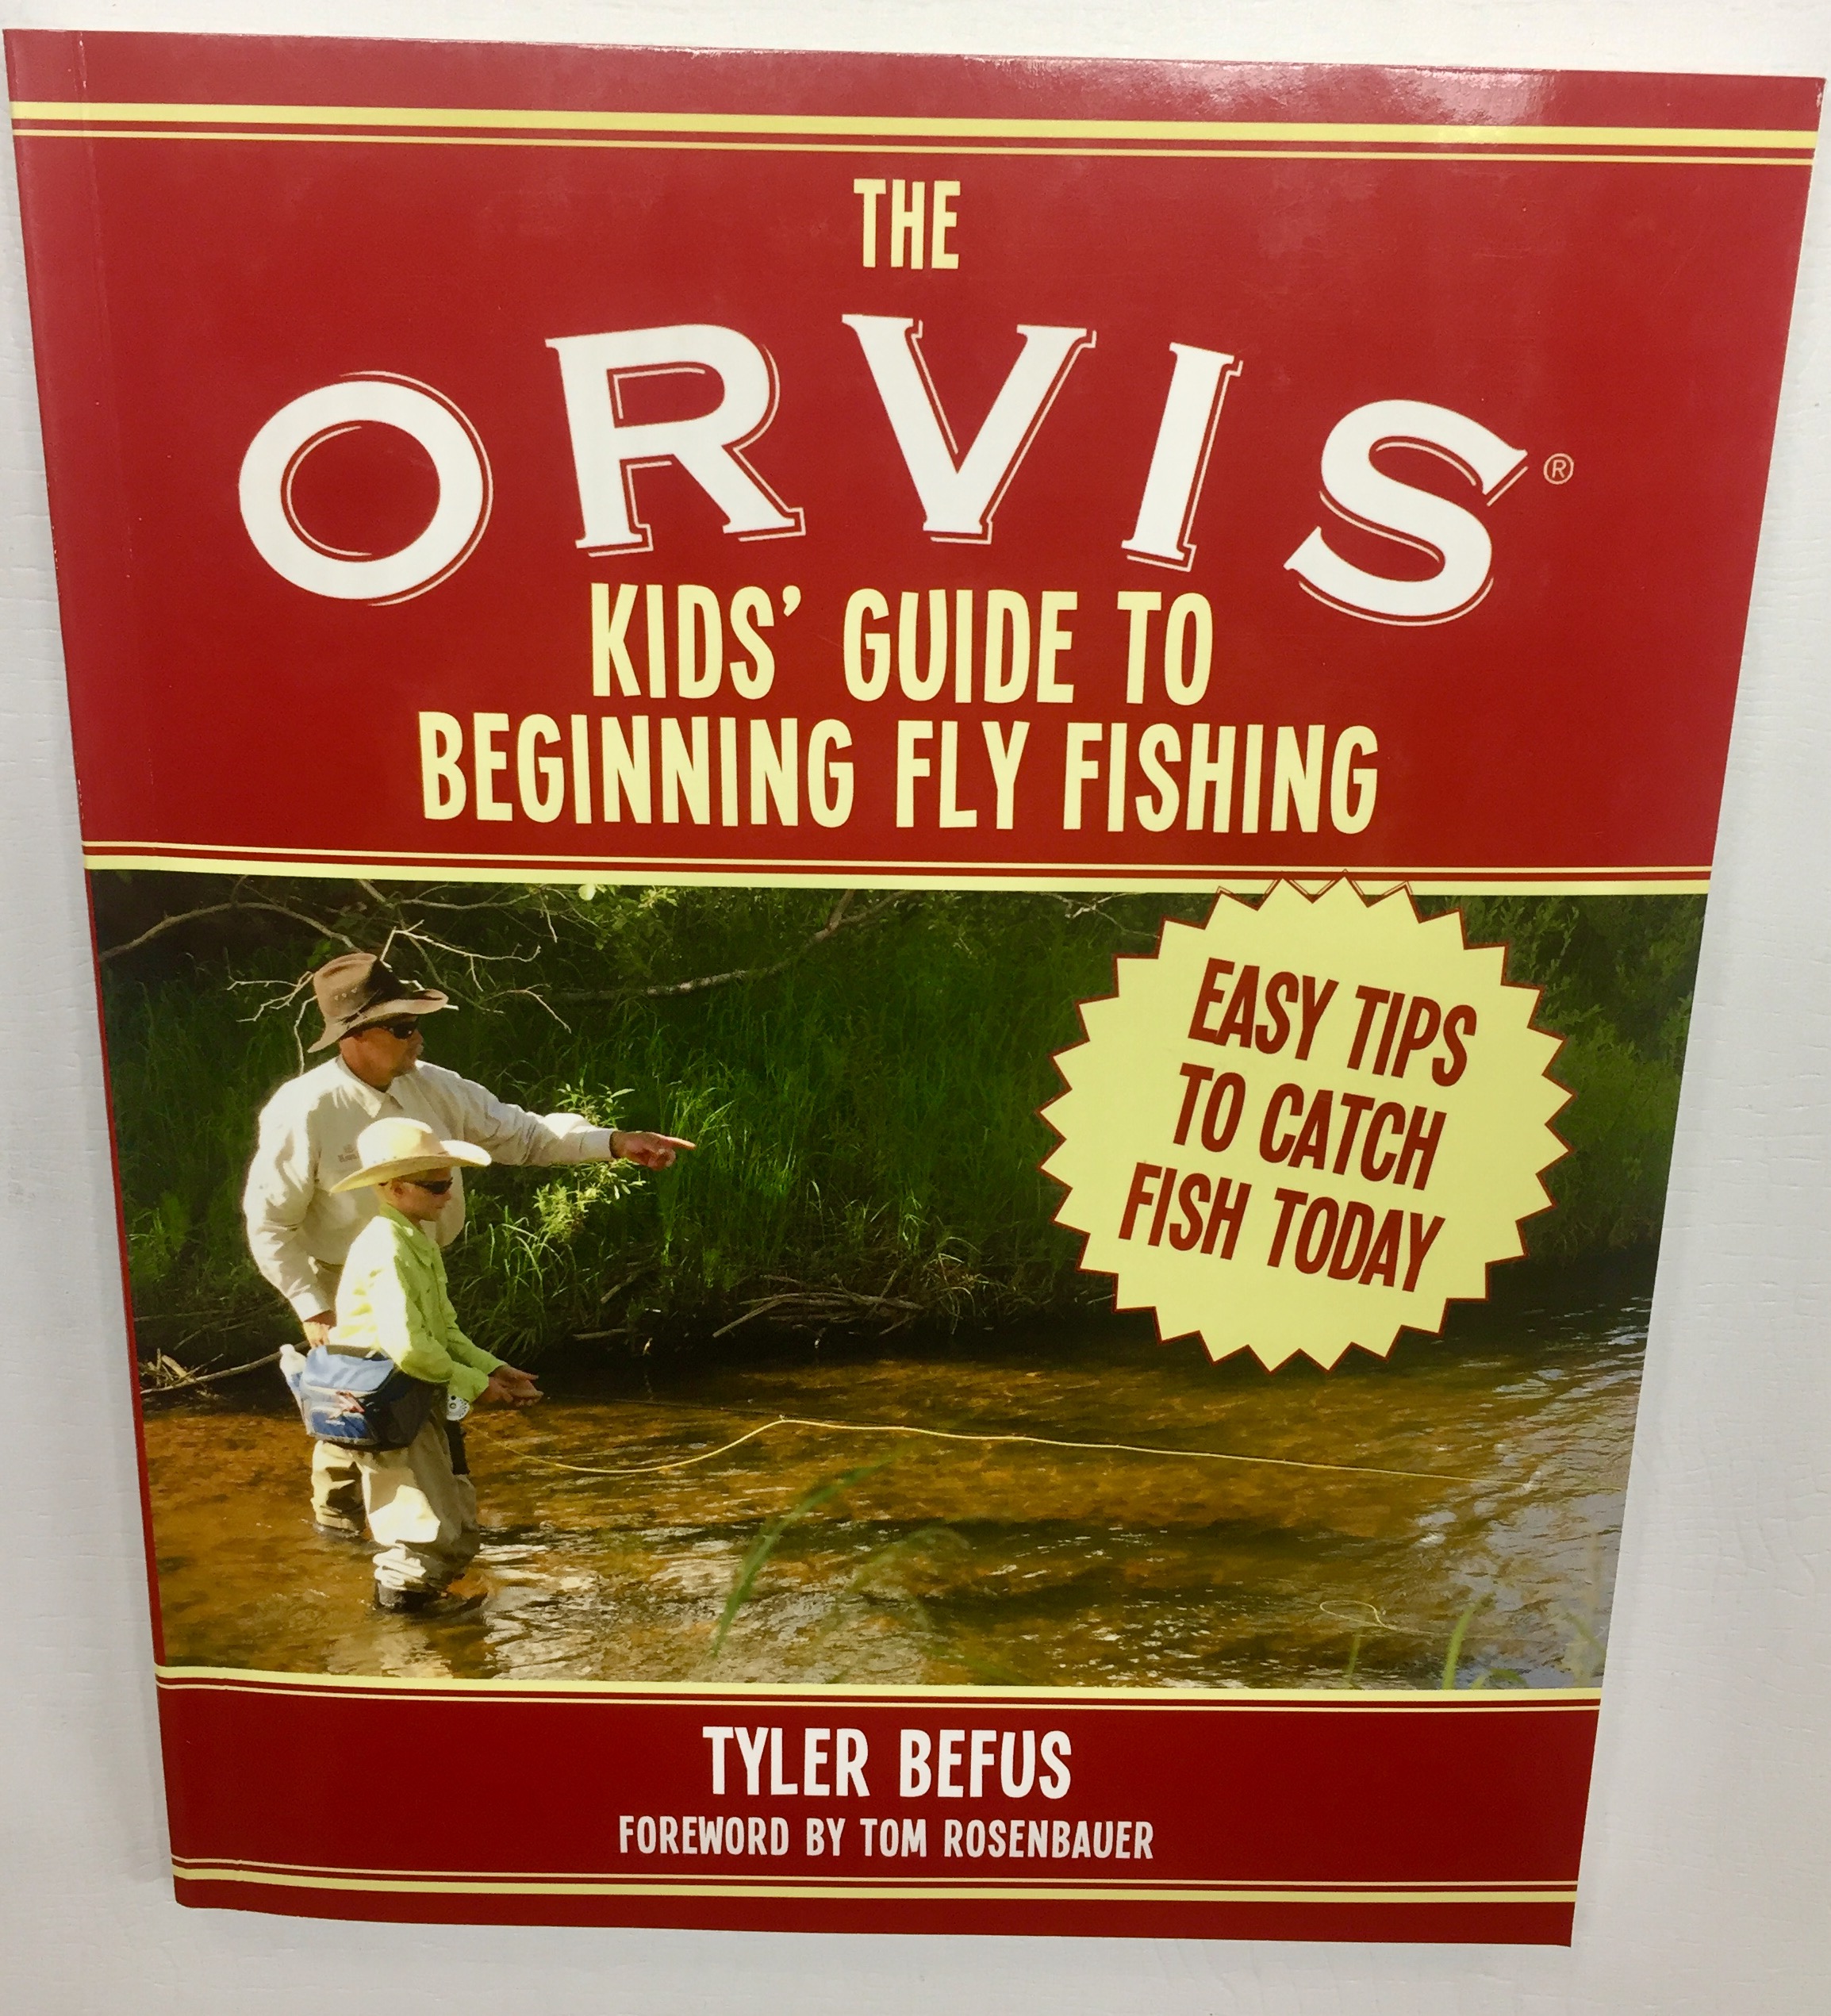 The Orvis Kids' Guide to Beginning Fly Fishing by Tyler Befus